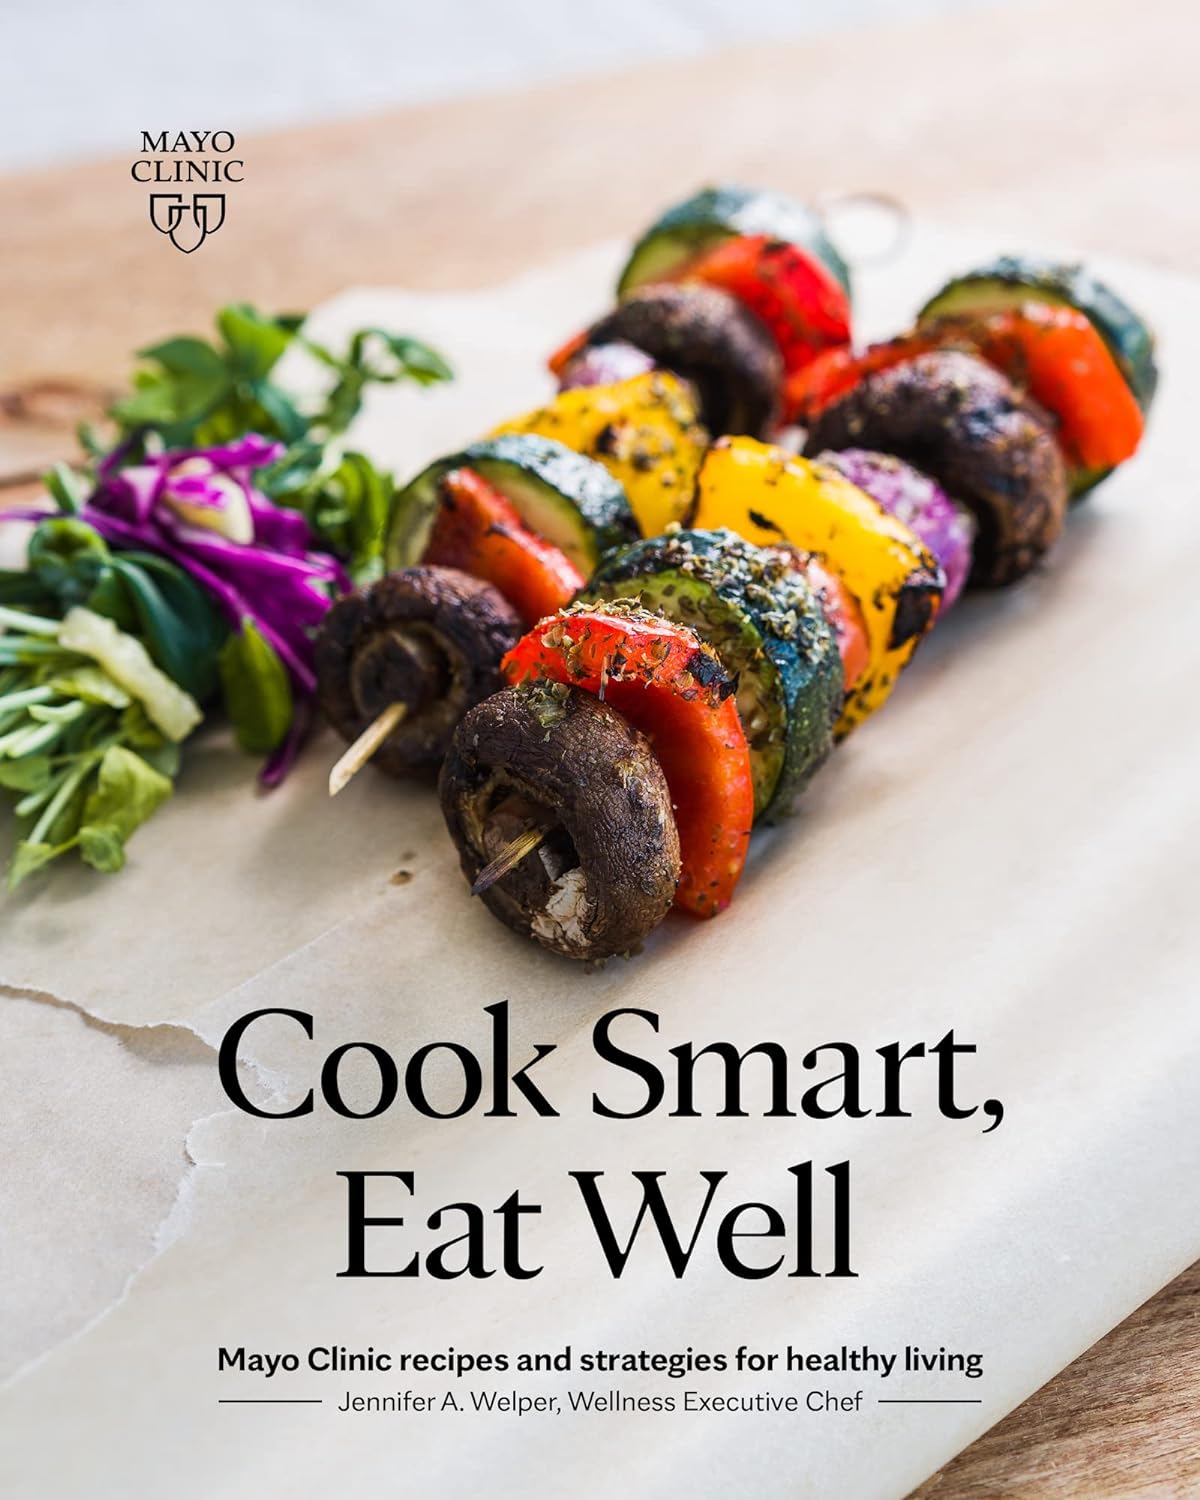 Cook Smart, Eat Well: Mayo Clinic recipes and strategies for healthy living     Paperback – January 4, 2022